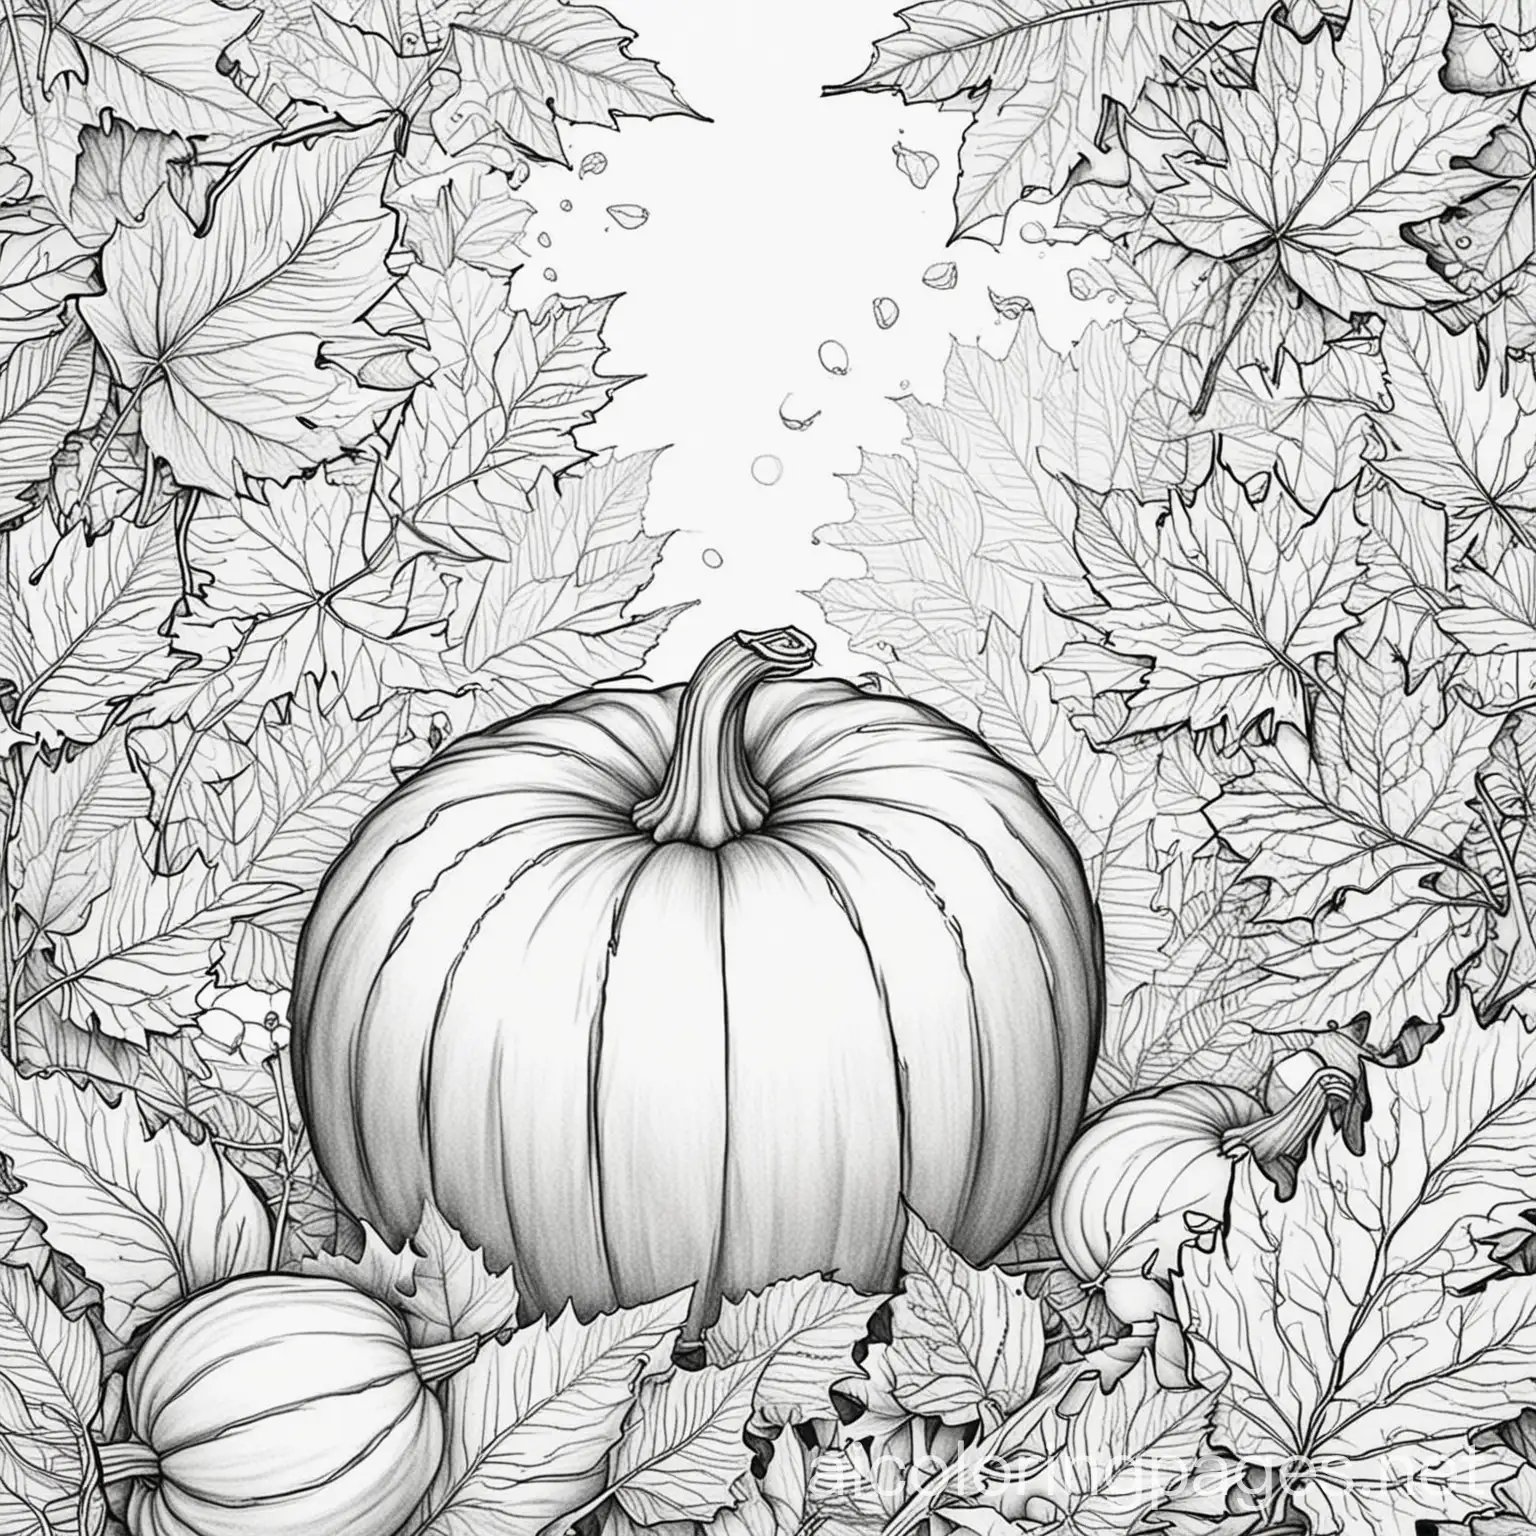 Autumn-Coloring-Page-with-Pumpkins-and-Leaves